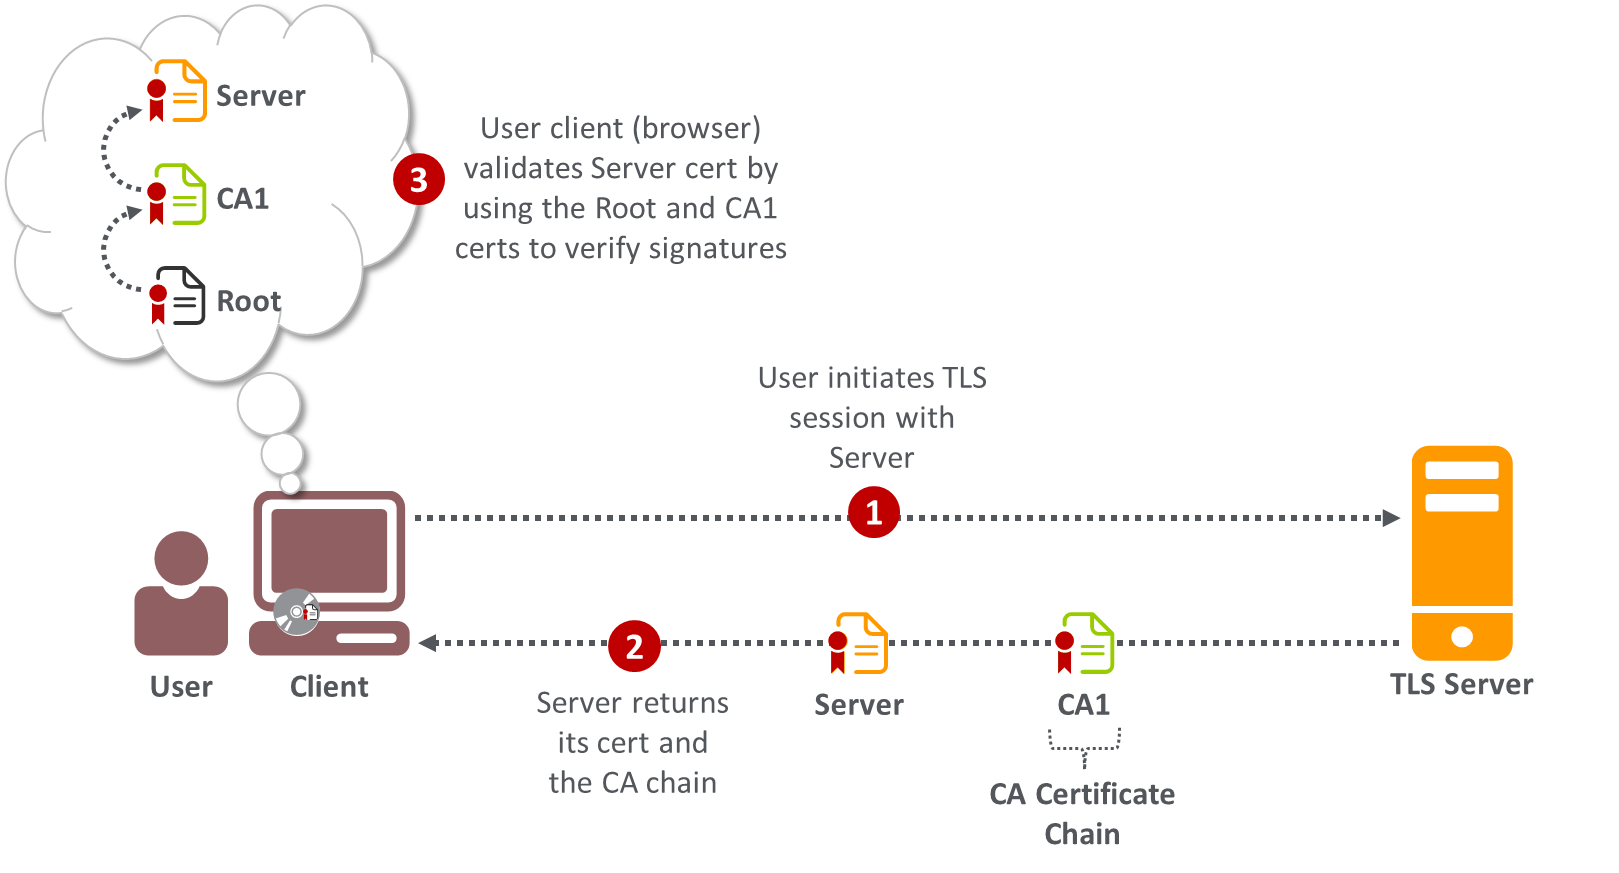 Figure depicting a three-step process of (1) user's client initiating a TLS session with a server; (2) the server responding by returning its certificate and the CA chain; and (3) the client using the Root certificate and the CA chain to verify signatures, thereby validating the server certificate